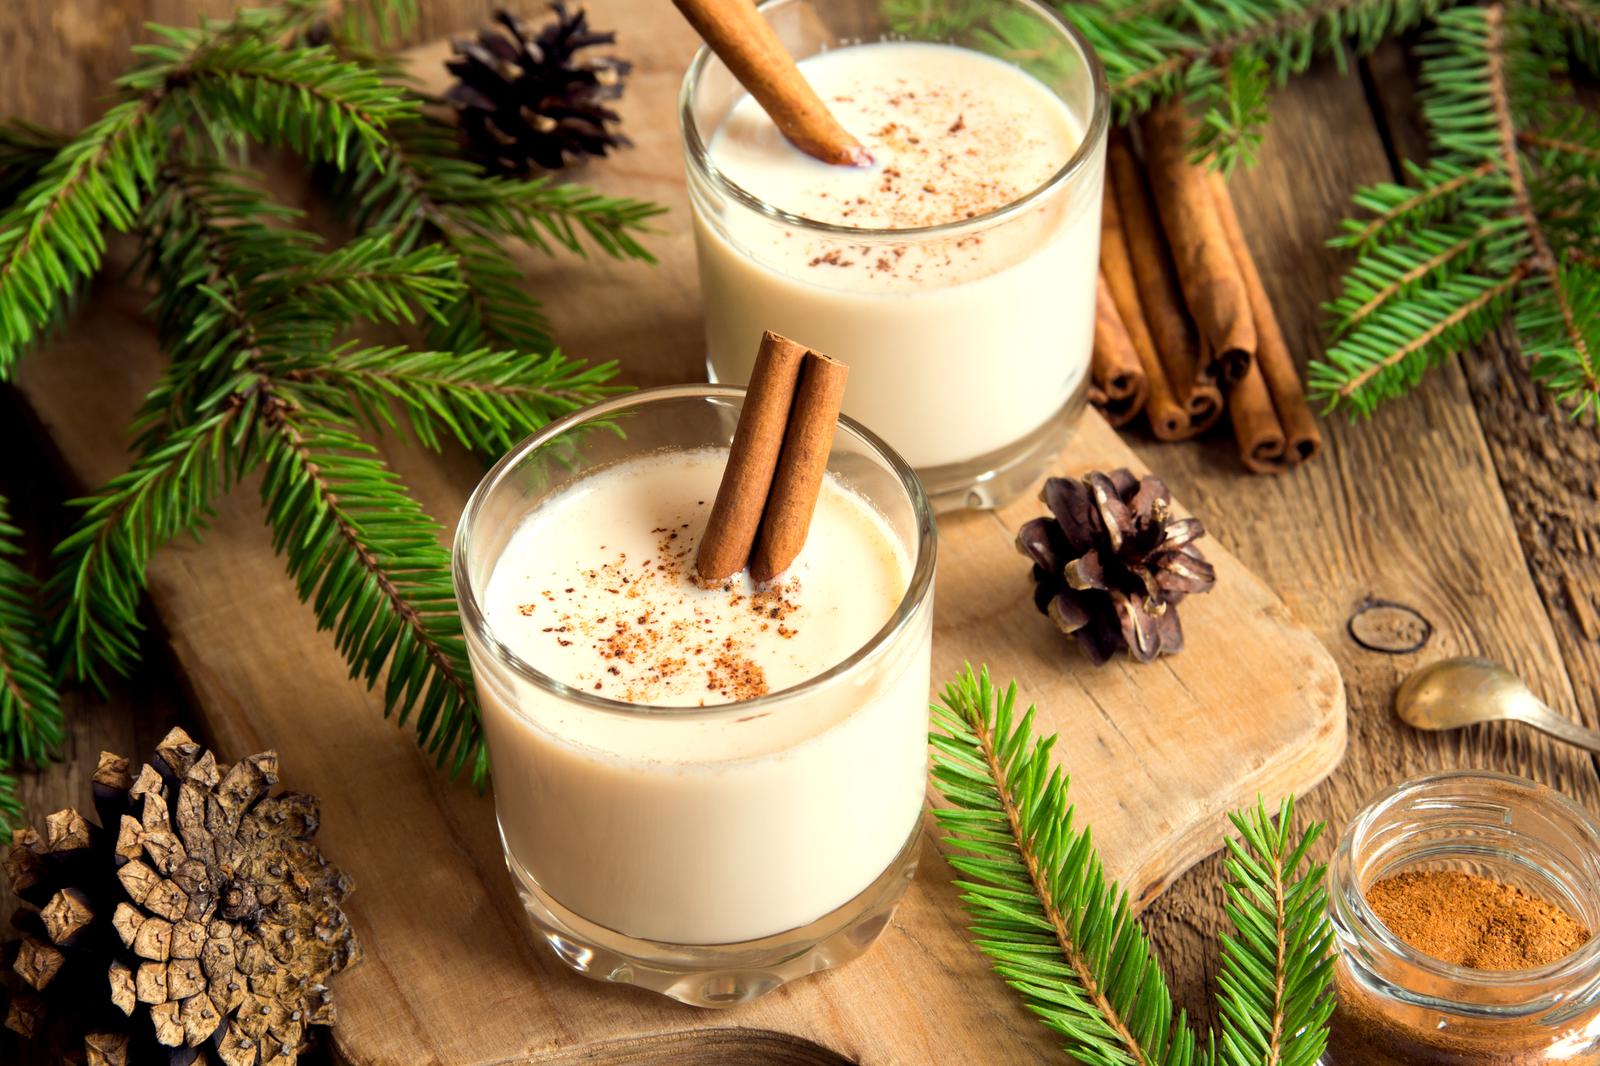 You got: Eggnog! We’ll Reveal Your 100% Christmas Dessert Match Based on Your Holiday Opinions